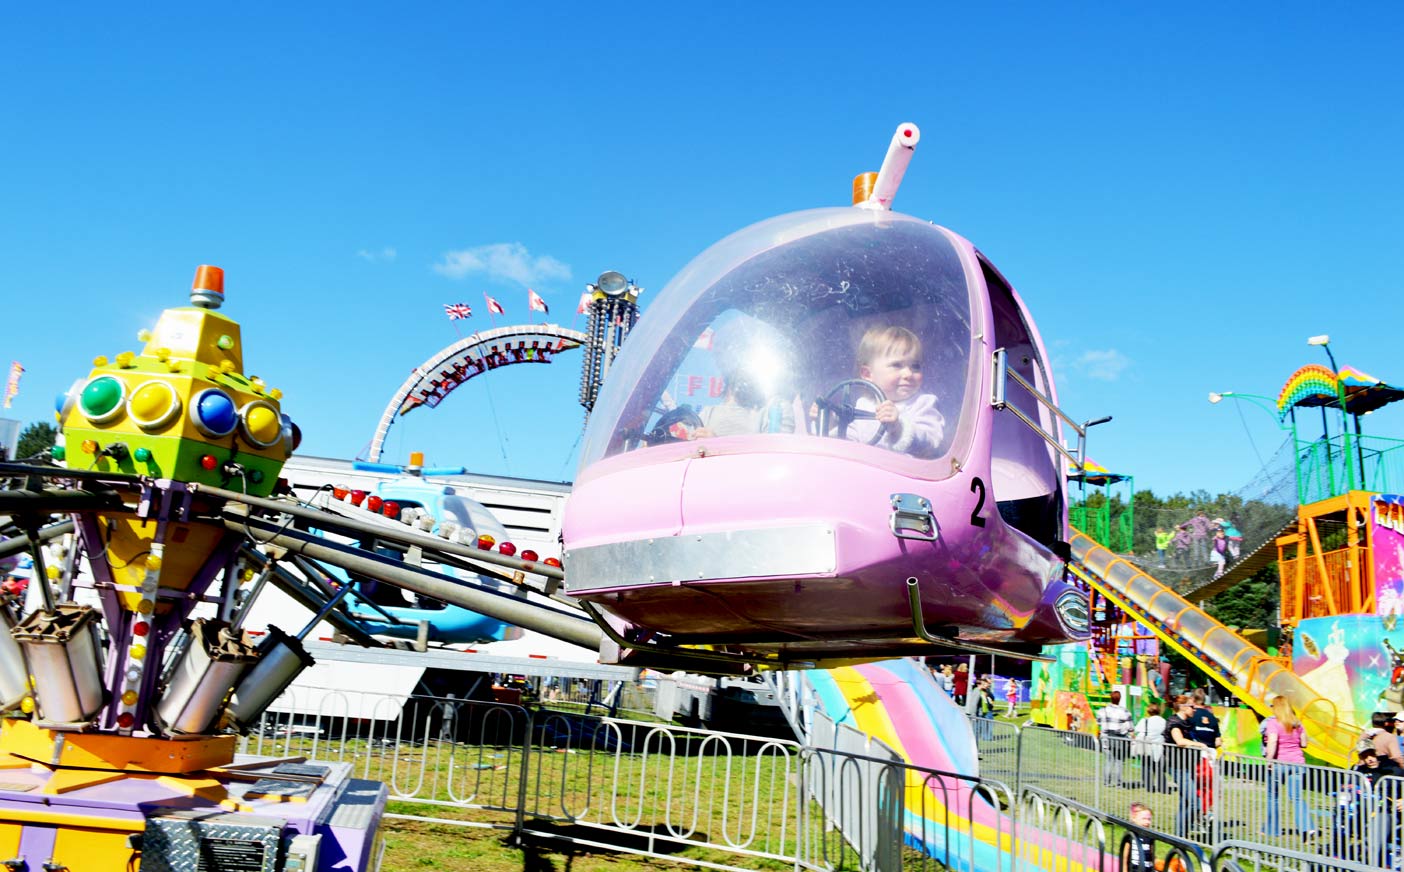 Blue skies, cotton candy and wicked rides: fair fun draws ...